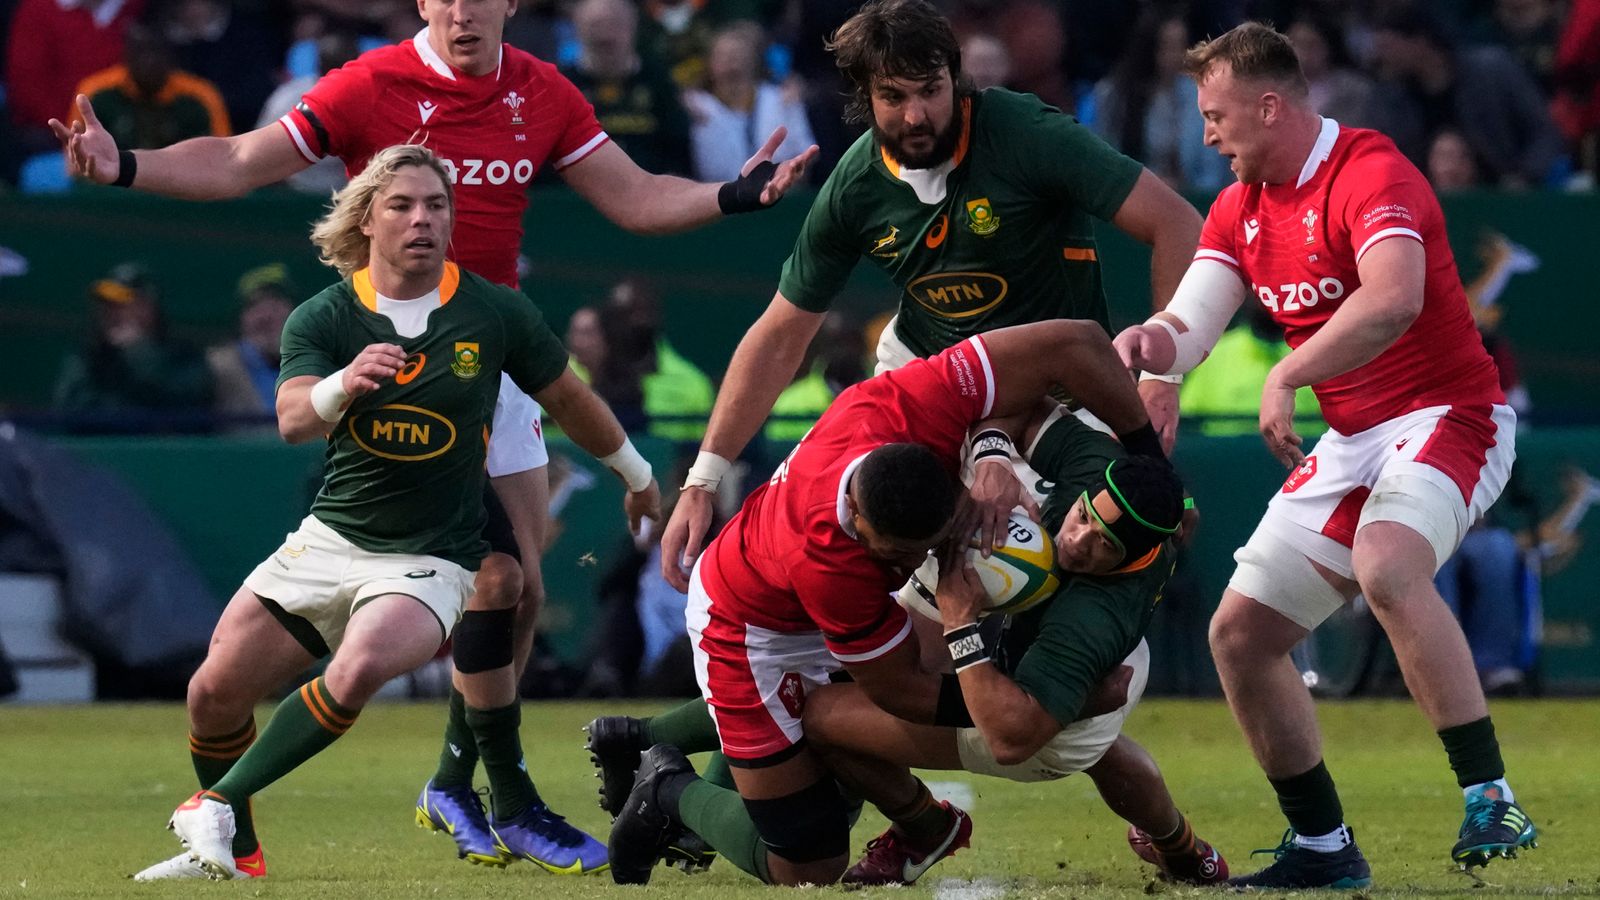 South Africa 32 – 29 Wales